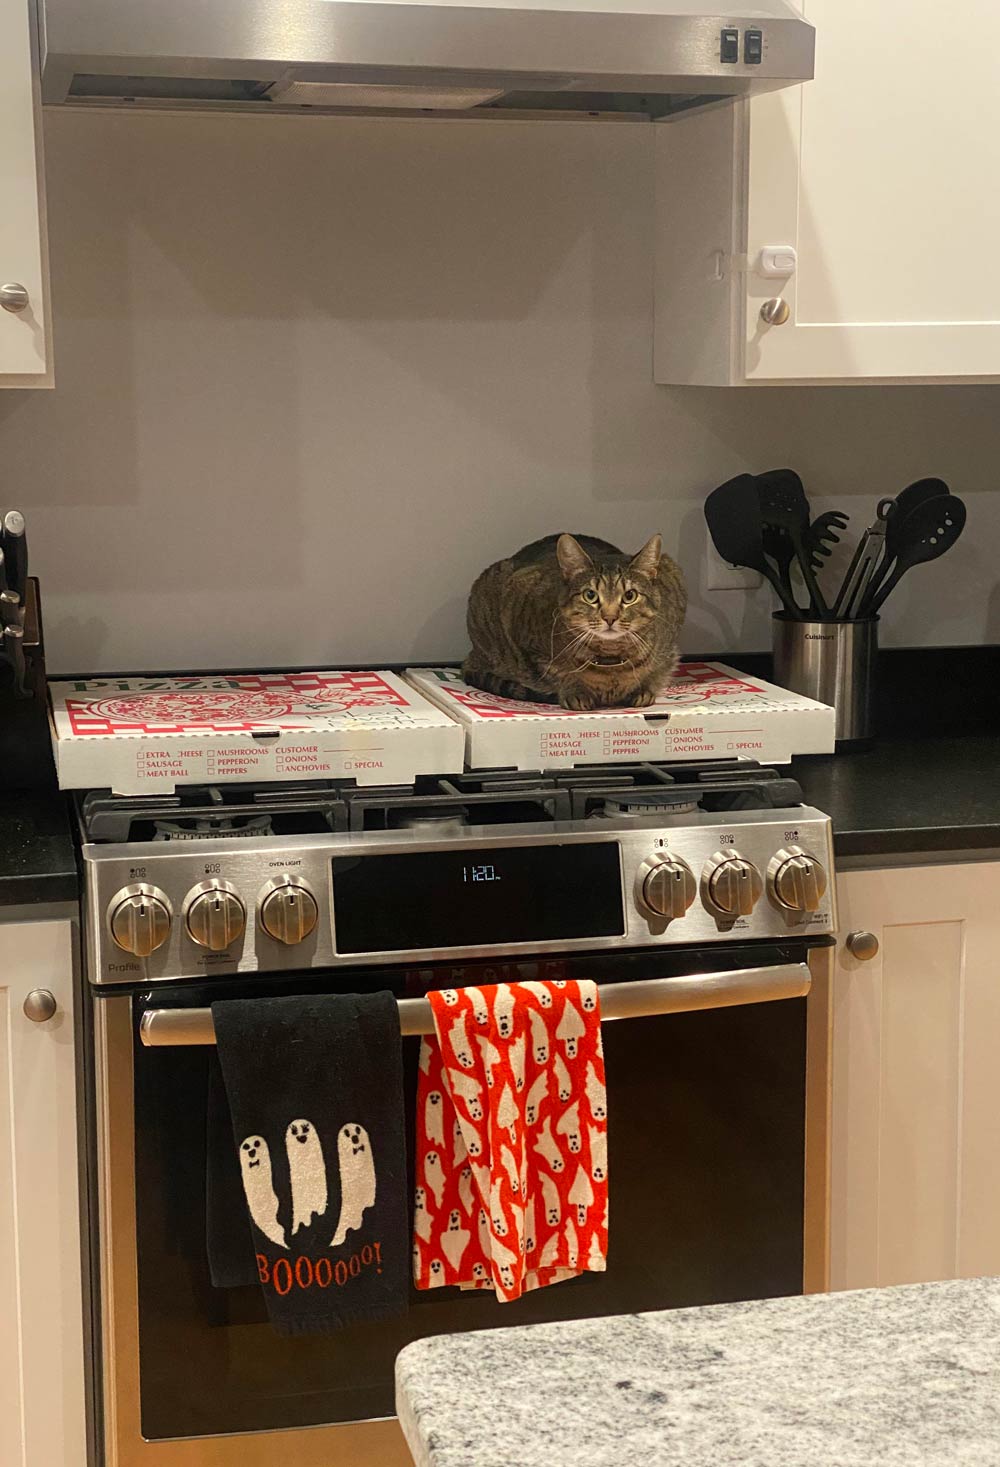 Dilly, the Protector of all that is Pizza